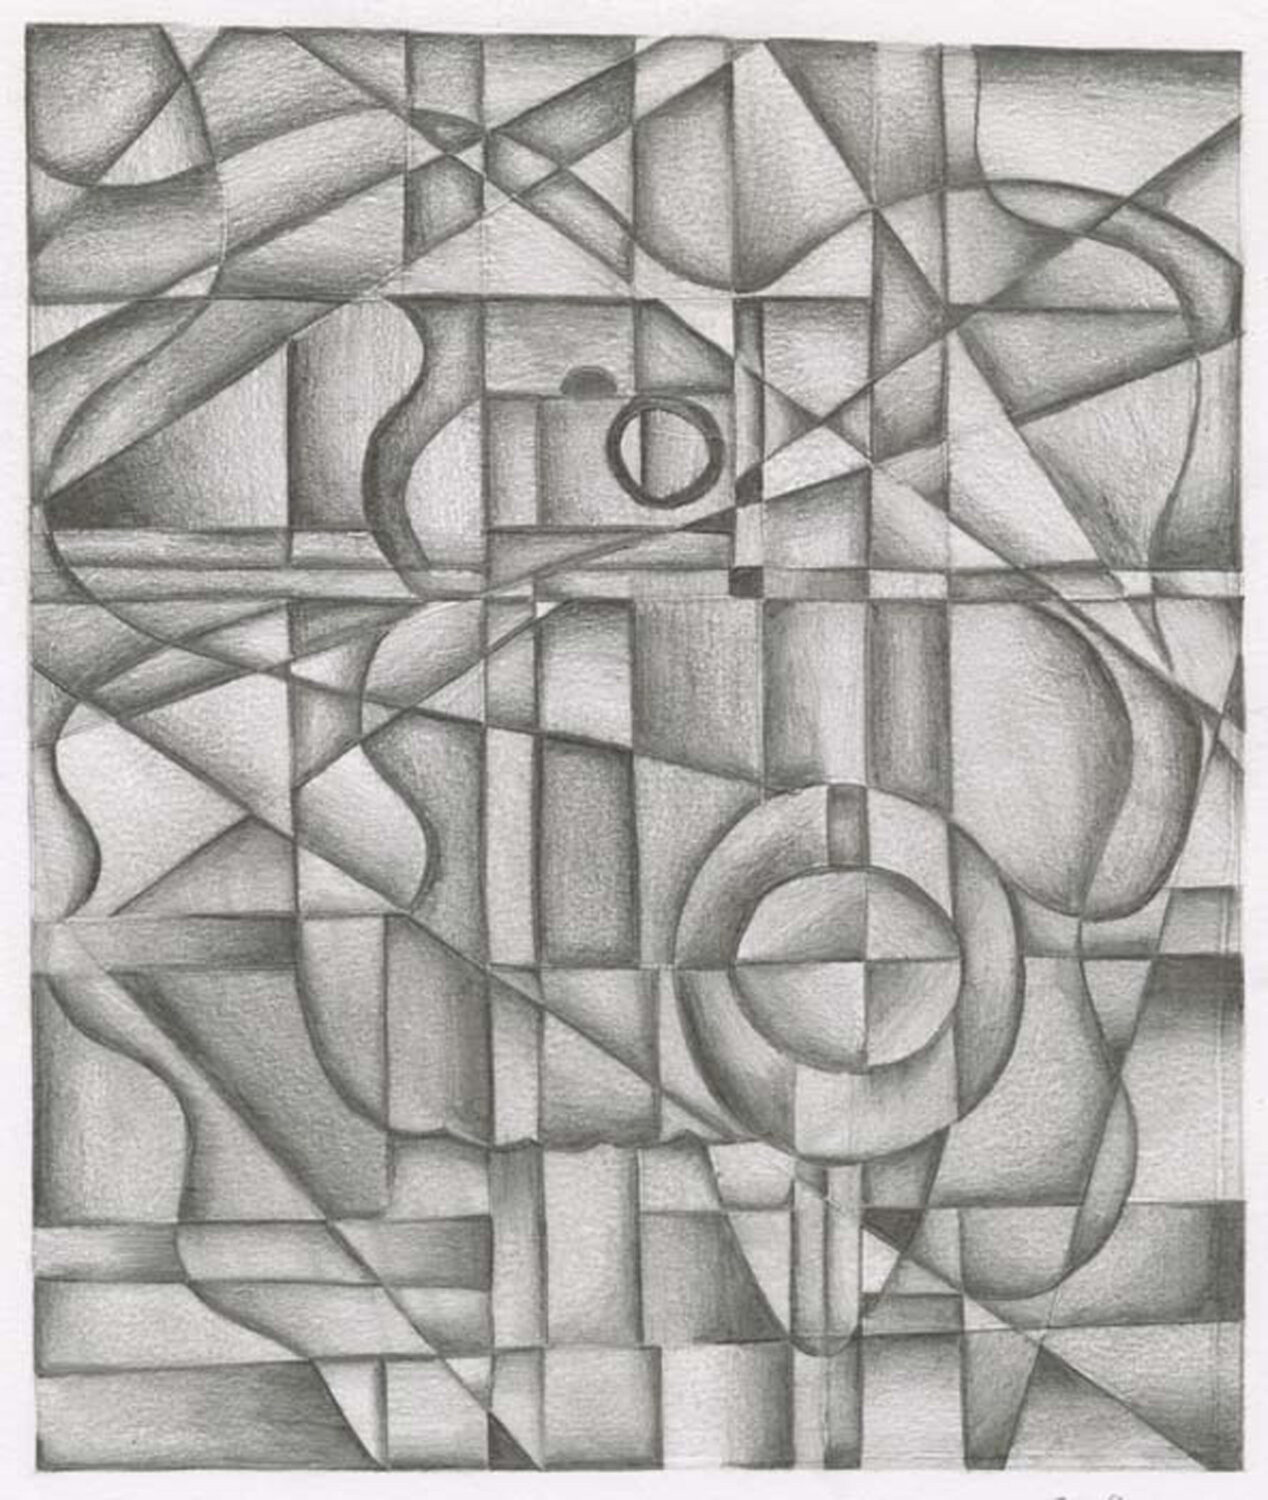 thumbnail of Graphite on paper by Sami Sumiti Devi titled Abstract Composition.